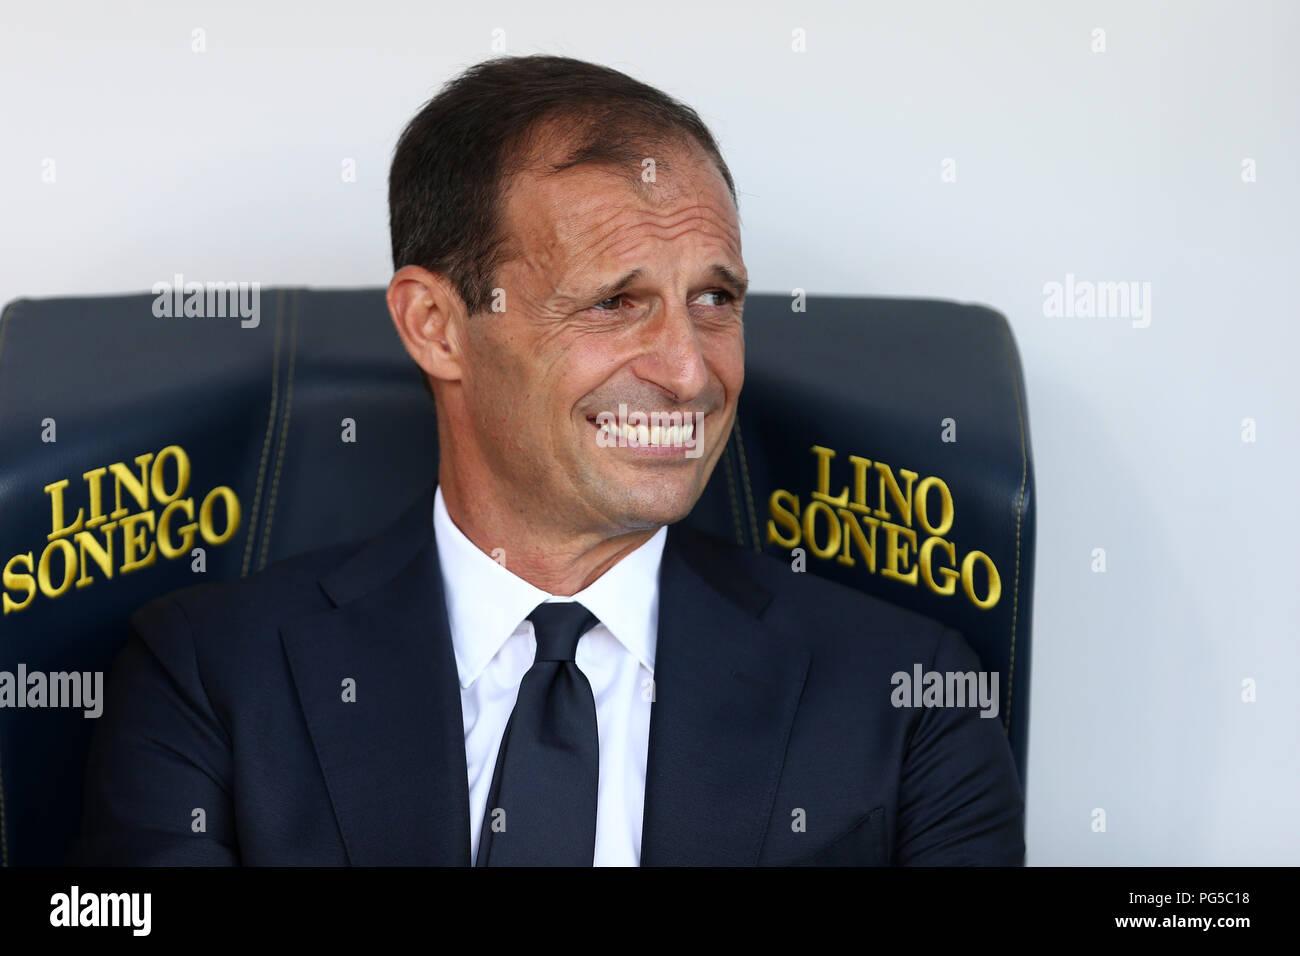 Massimiliano Allegri, head coach of Juventus FC, looks on before the Serie A football match between Ac Chievo Verona and Juventus Fc. Stock Photo